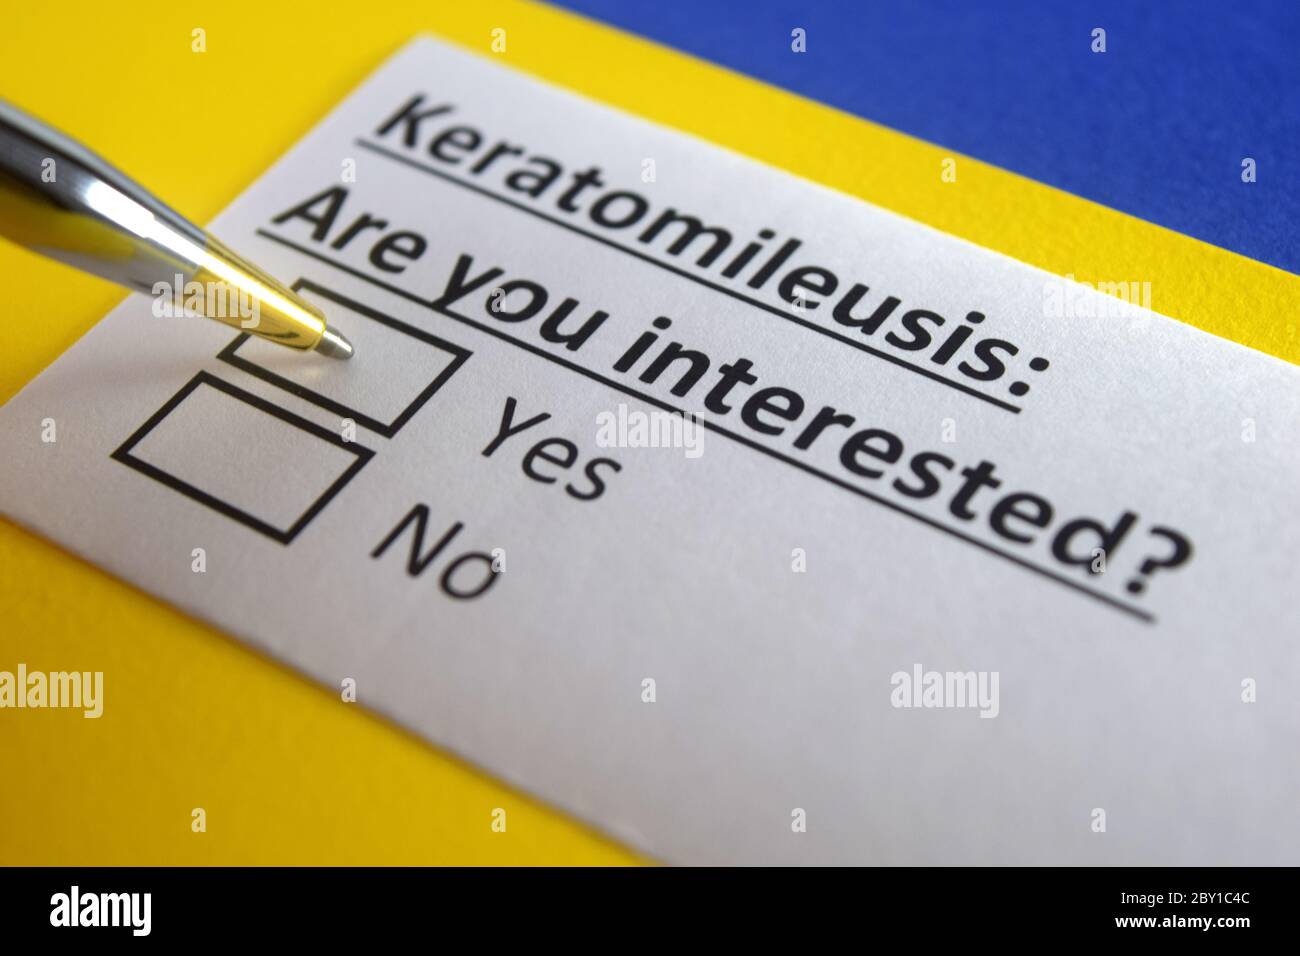 One person is answering question about keratomileusis. Stock Photo